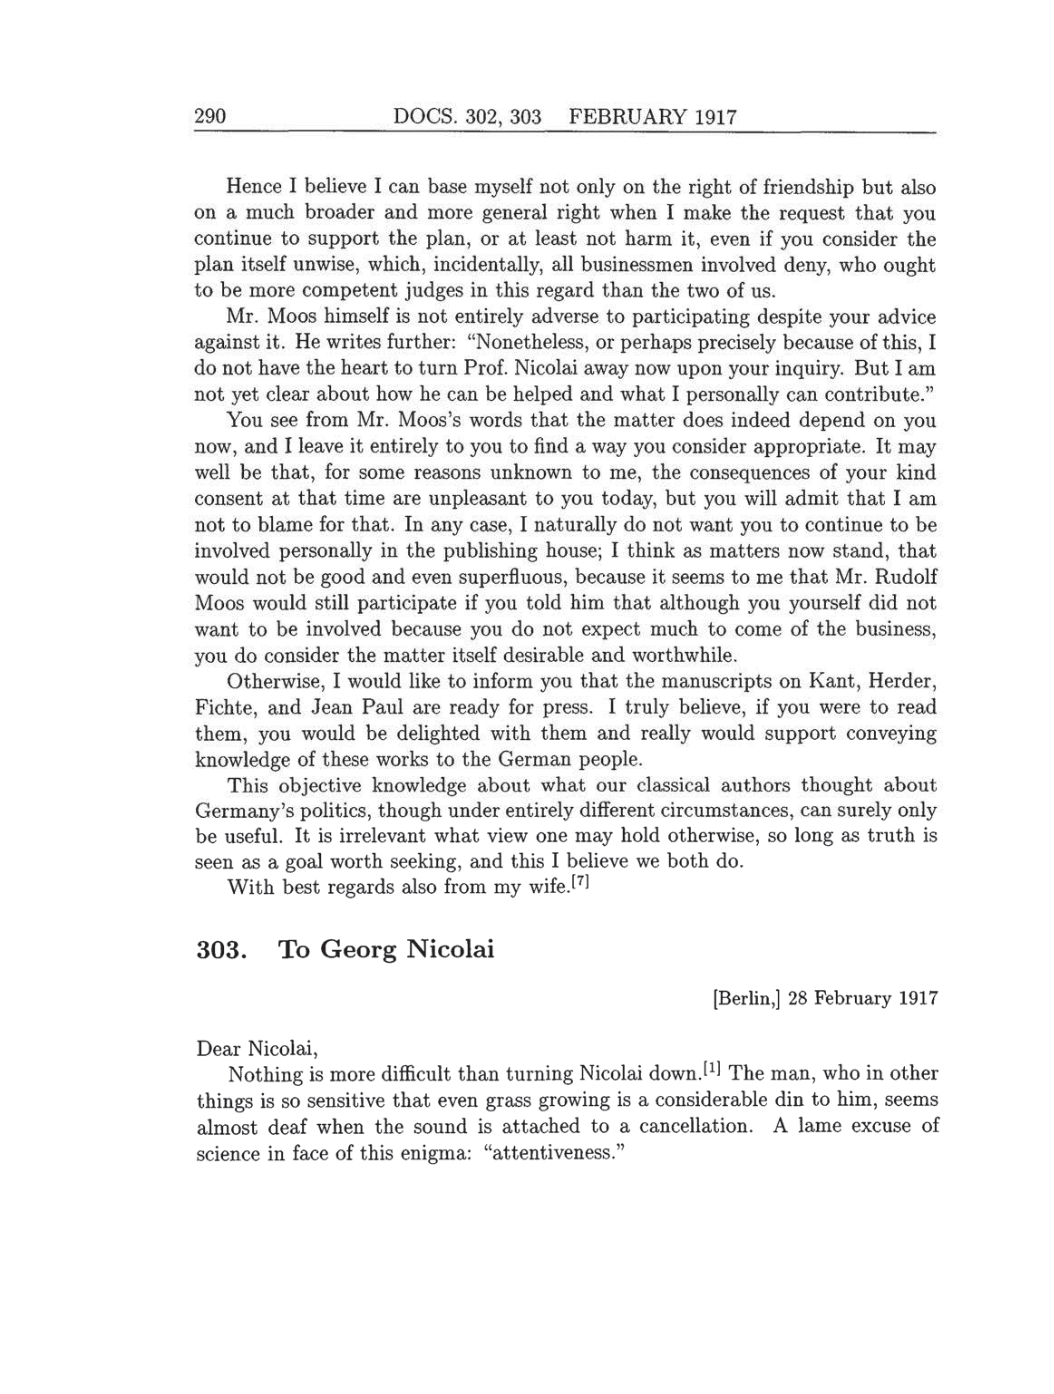 Volume 8: The Berlin Years: Correspondence, 1914-1918 (English translation supplement) page 290